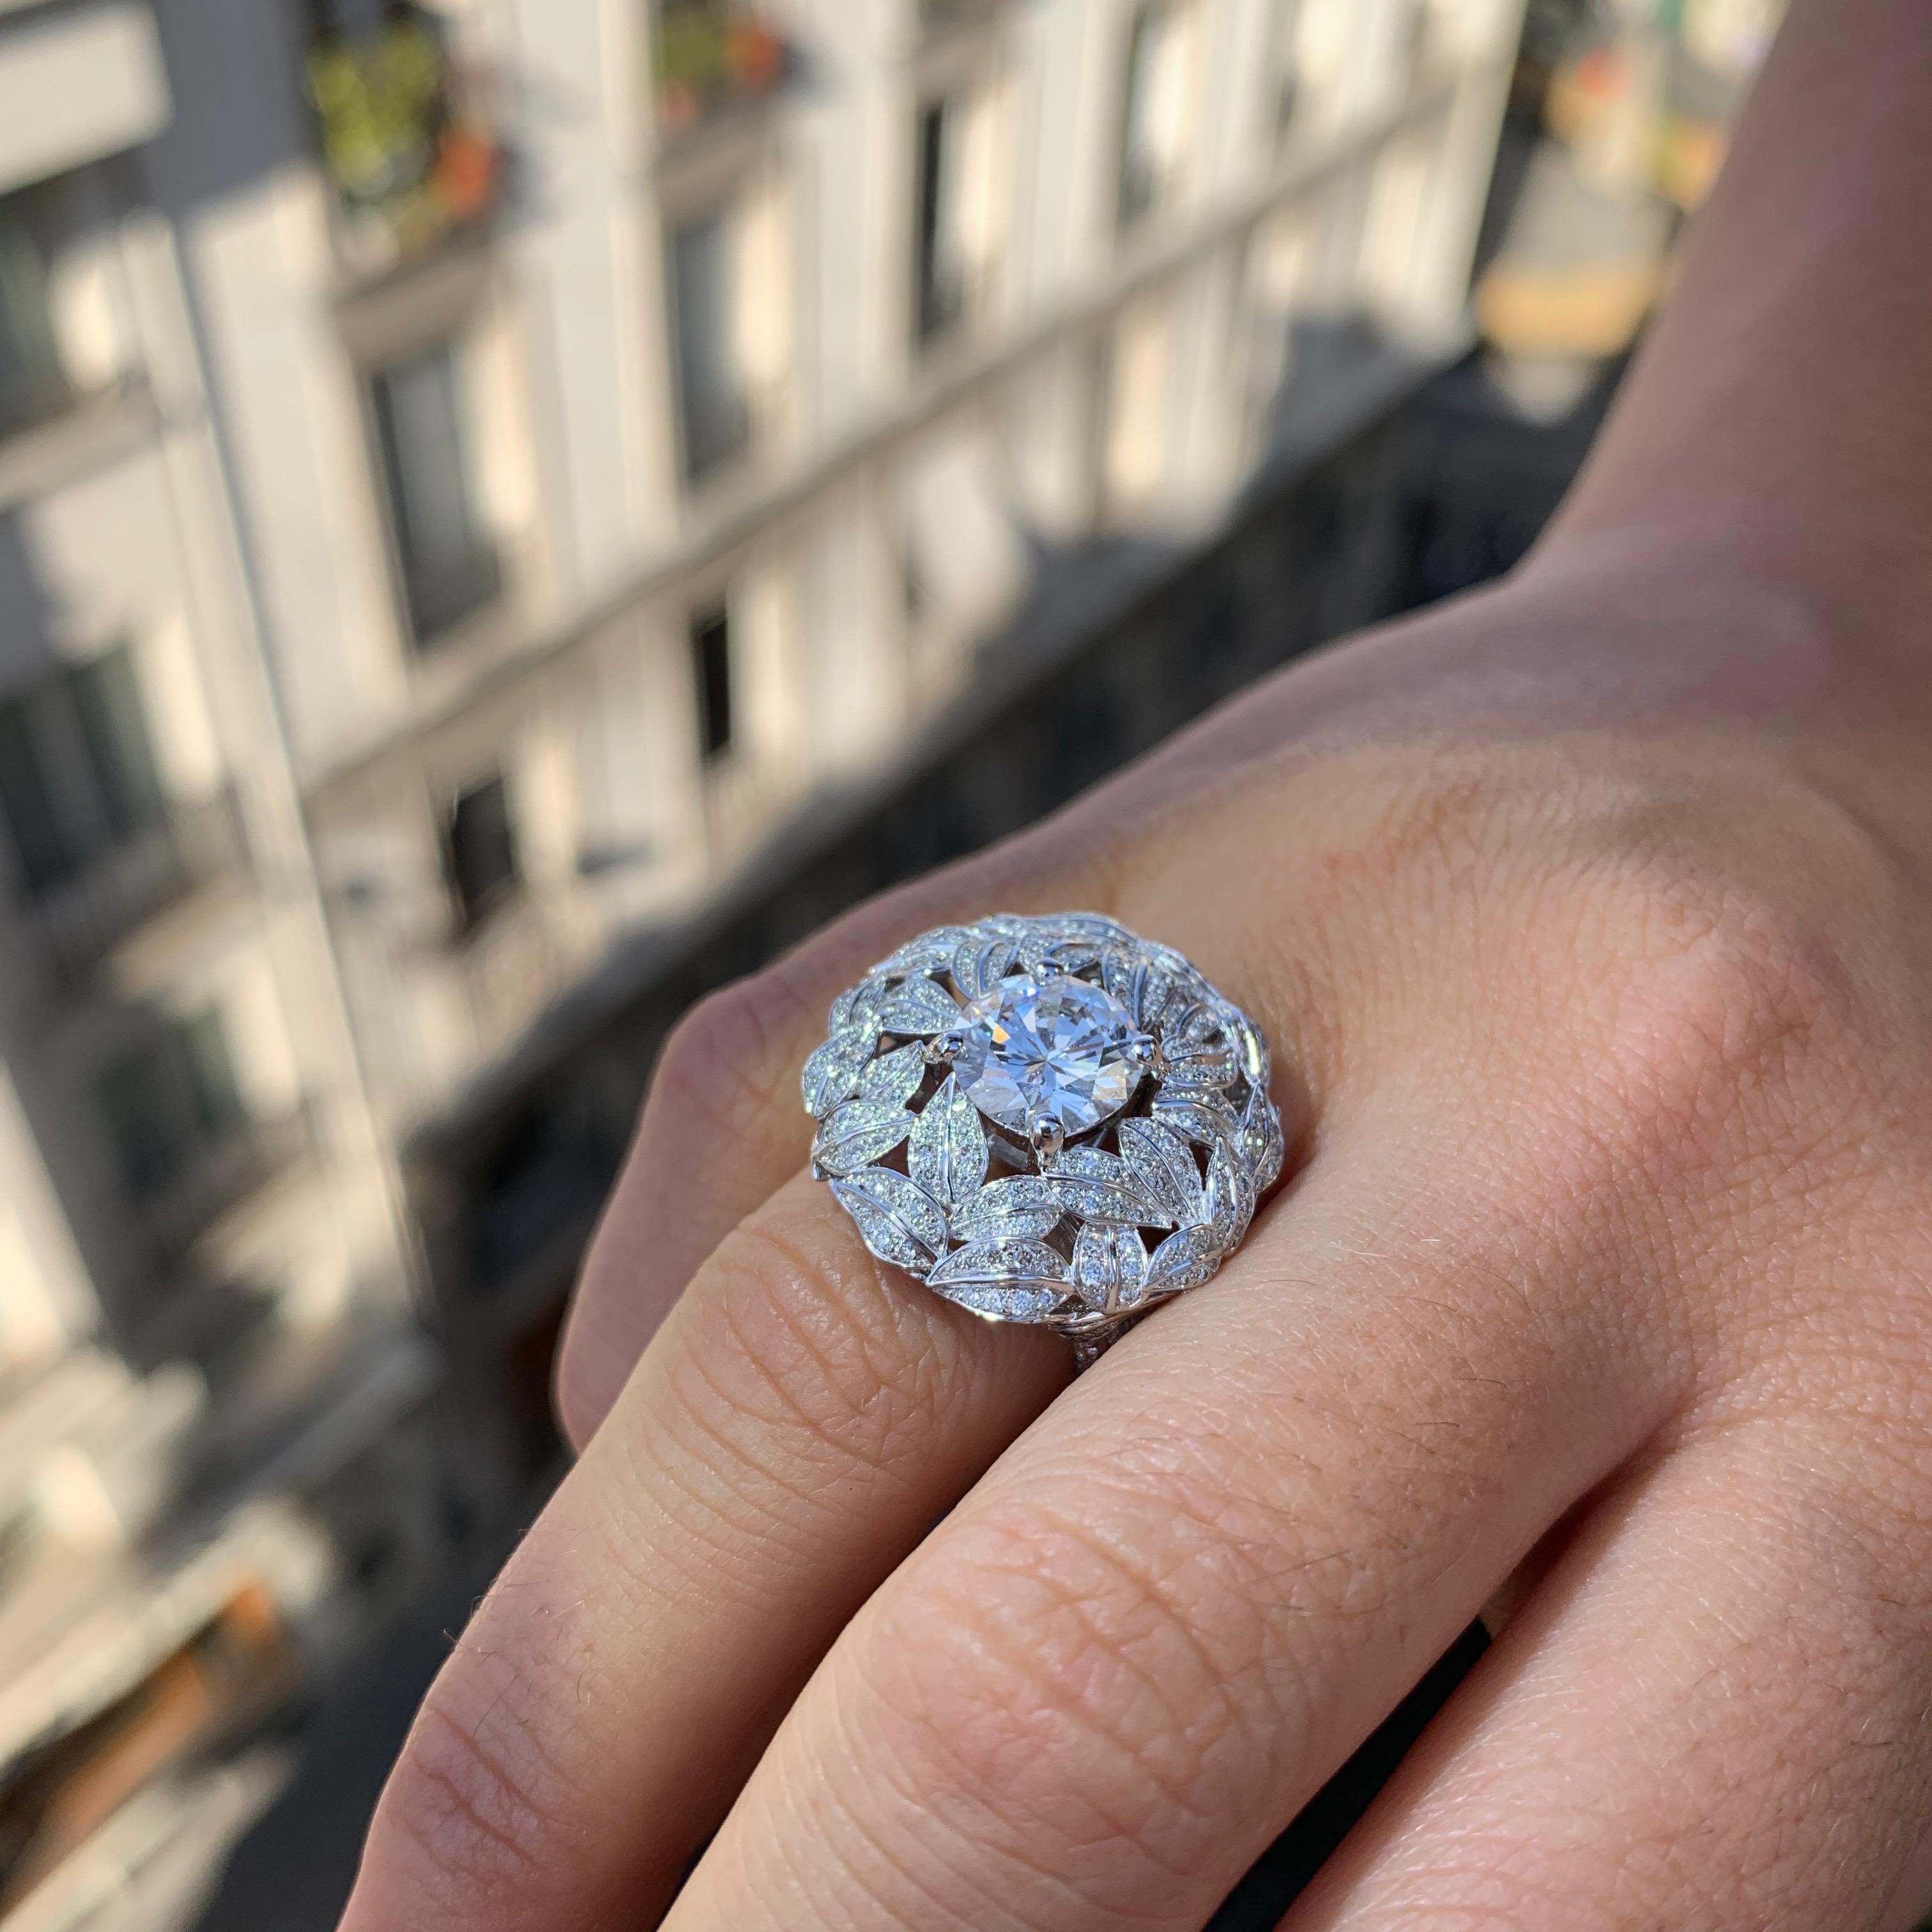 Handcrafted in France in our High Jewelry Paris workshop. Titled “Full Moon”, and designed by Édéenne, artist and founder of Maison Édéenne, the ring features a stunning GIA certified 2.02 carat D-VVS1 white diamond center stone at the top of a dome